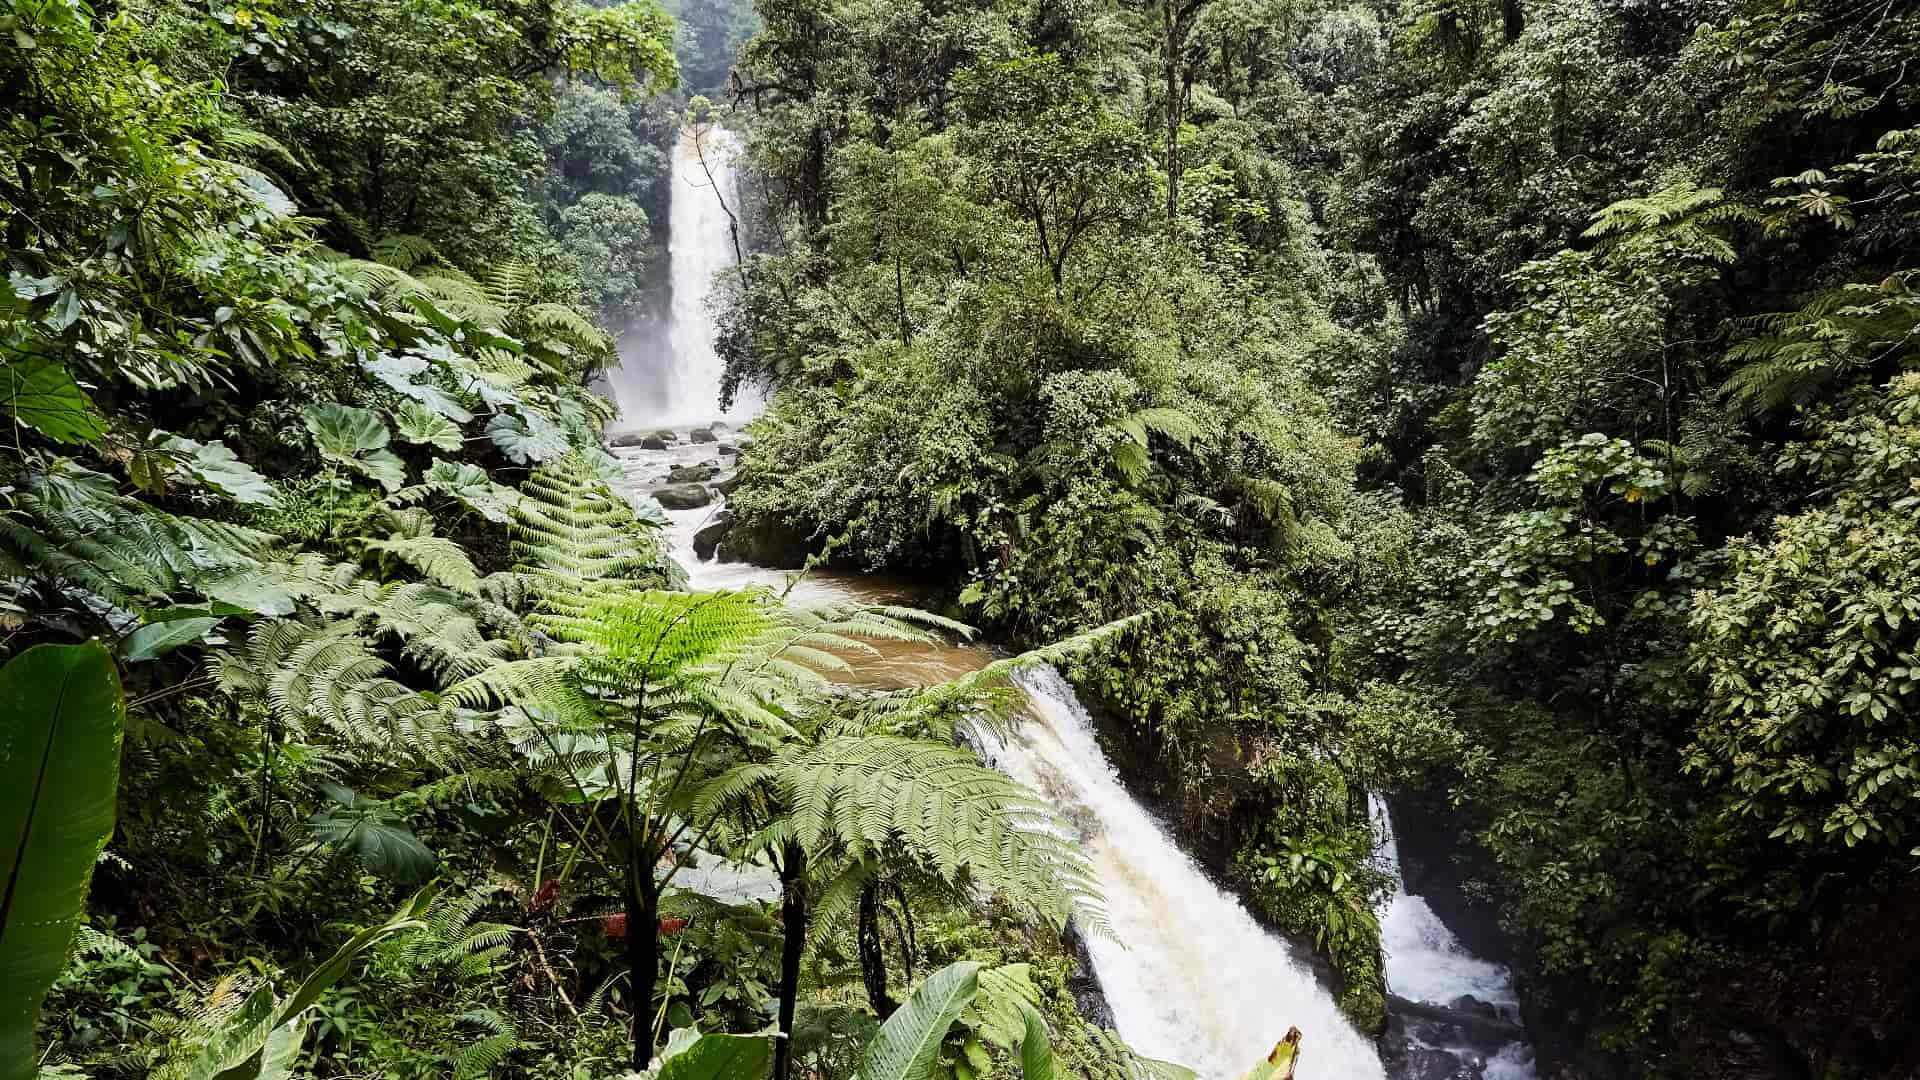 A majestic rainforest river surrounded by lush vegetation.